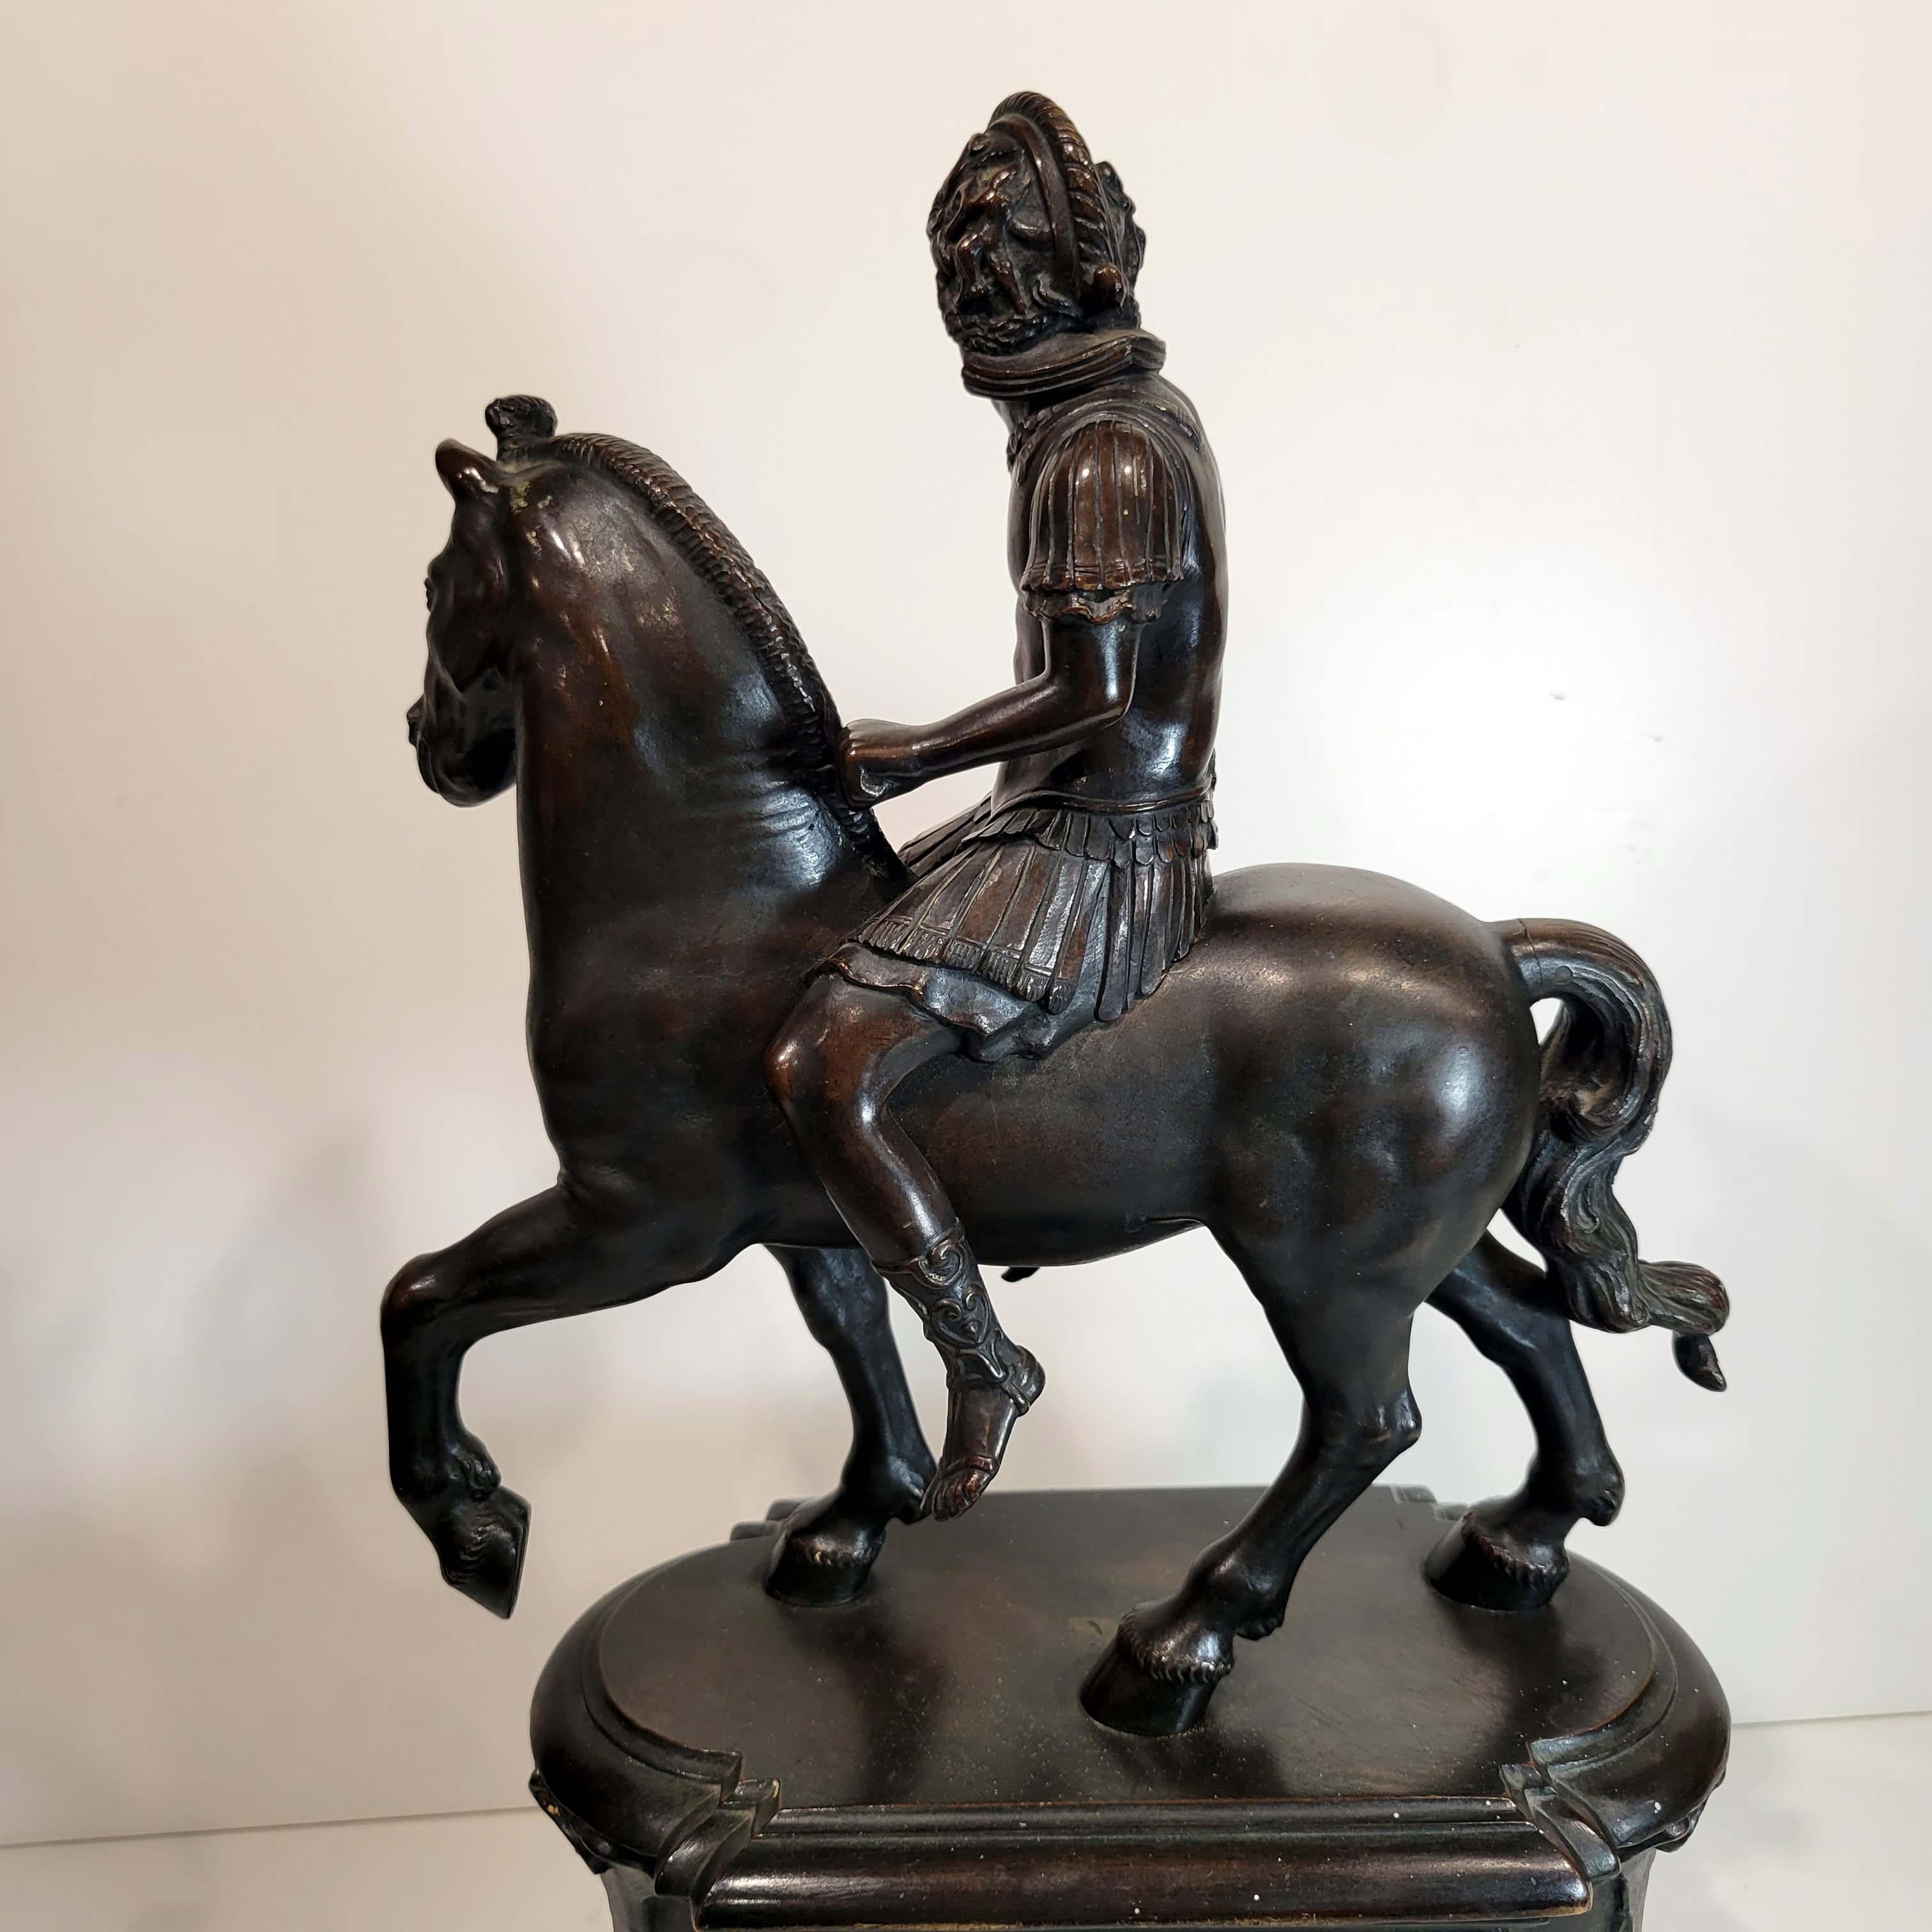 The rider in Roman armour and with his head turned to dexter; the horse pacing. After Riccio, Circa 18/19C. Lost wax casting in greenish black patina and reddish highlights. The base is cast bronze with two different relief panels on each side and